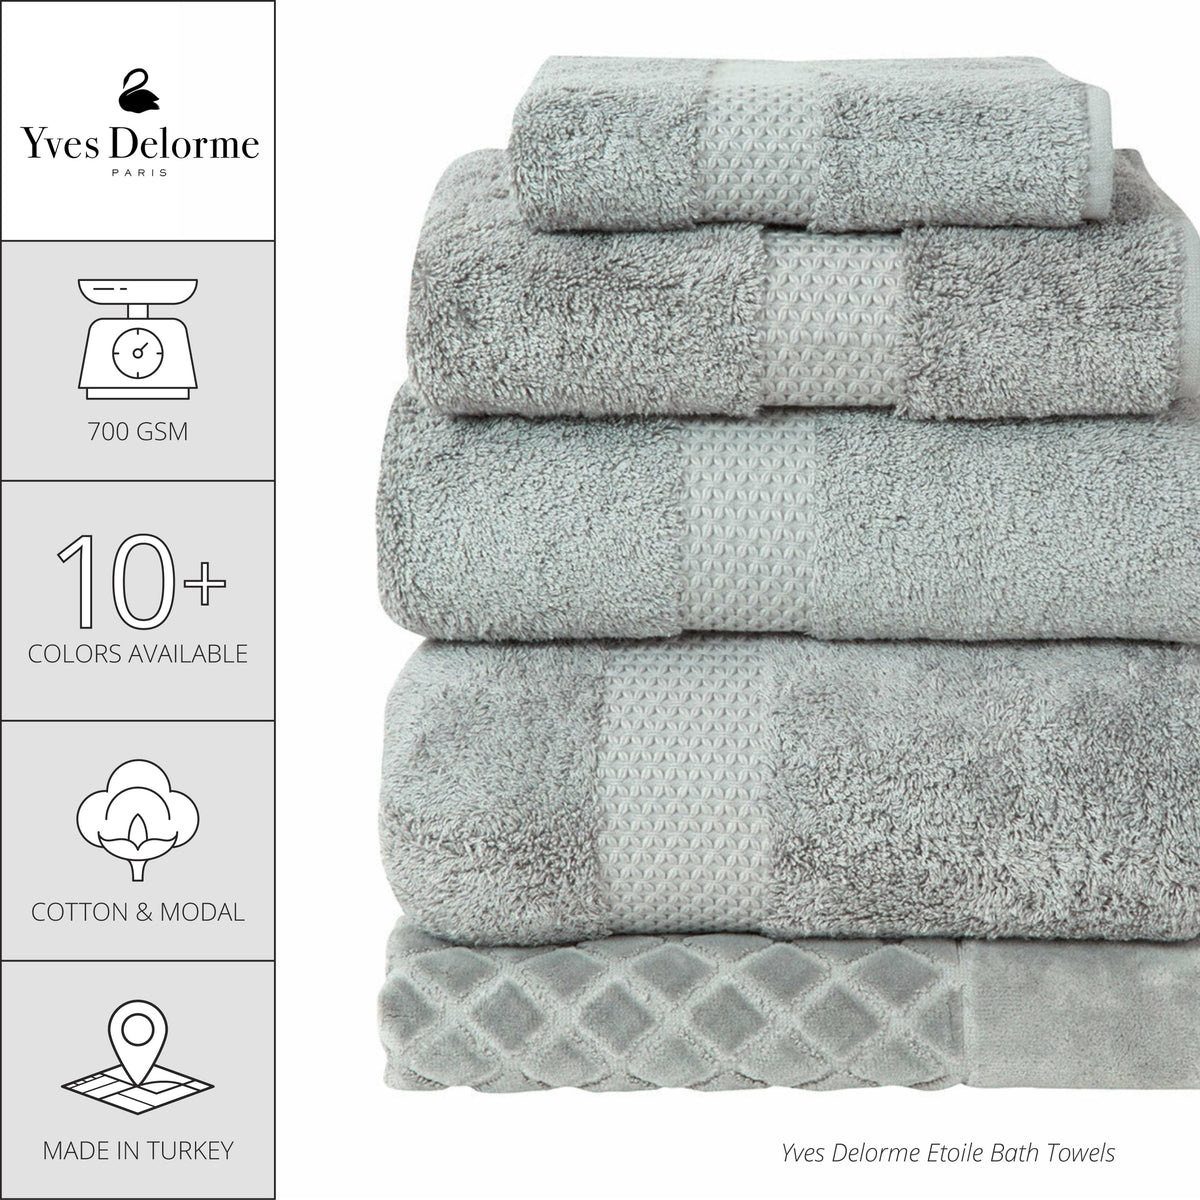 Infographic Detail of Yves Delorme Etoile Bath Towels and Mats